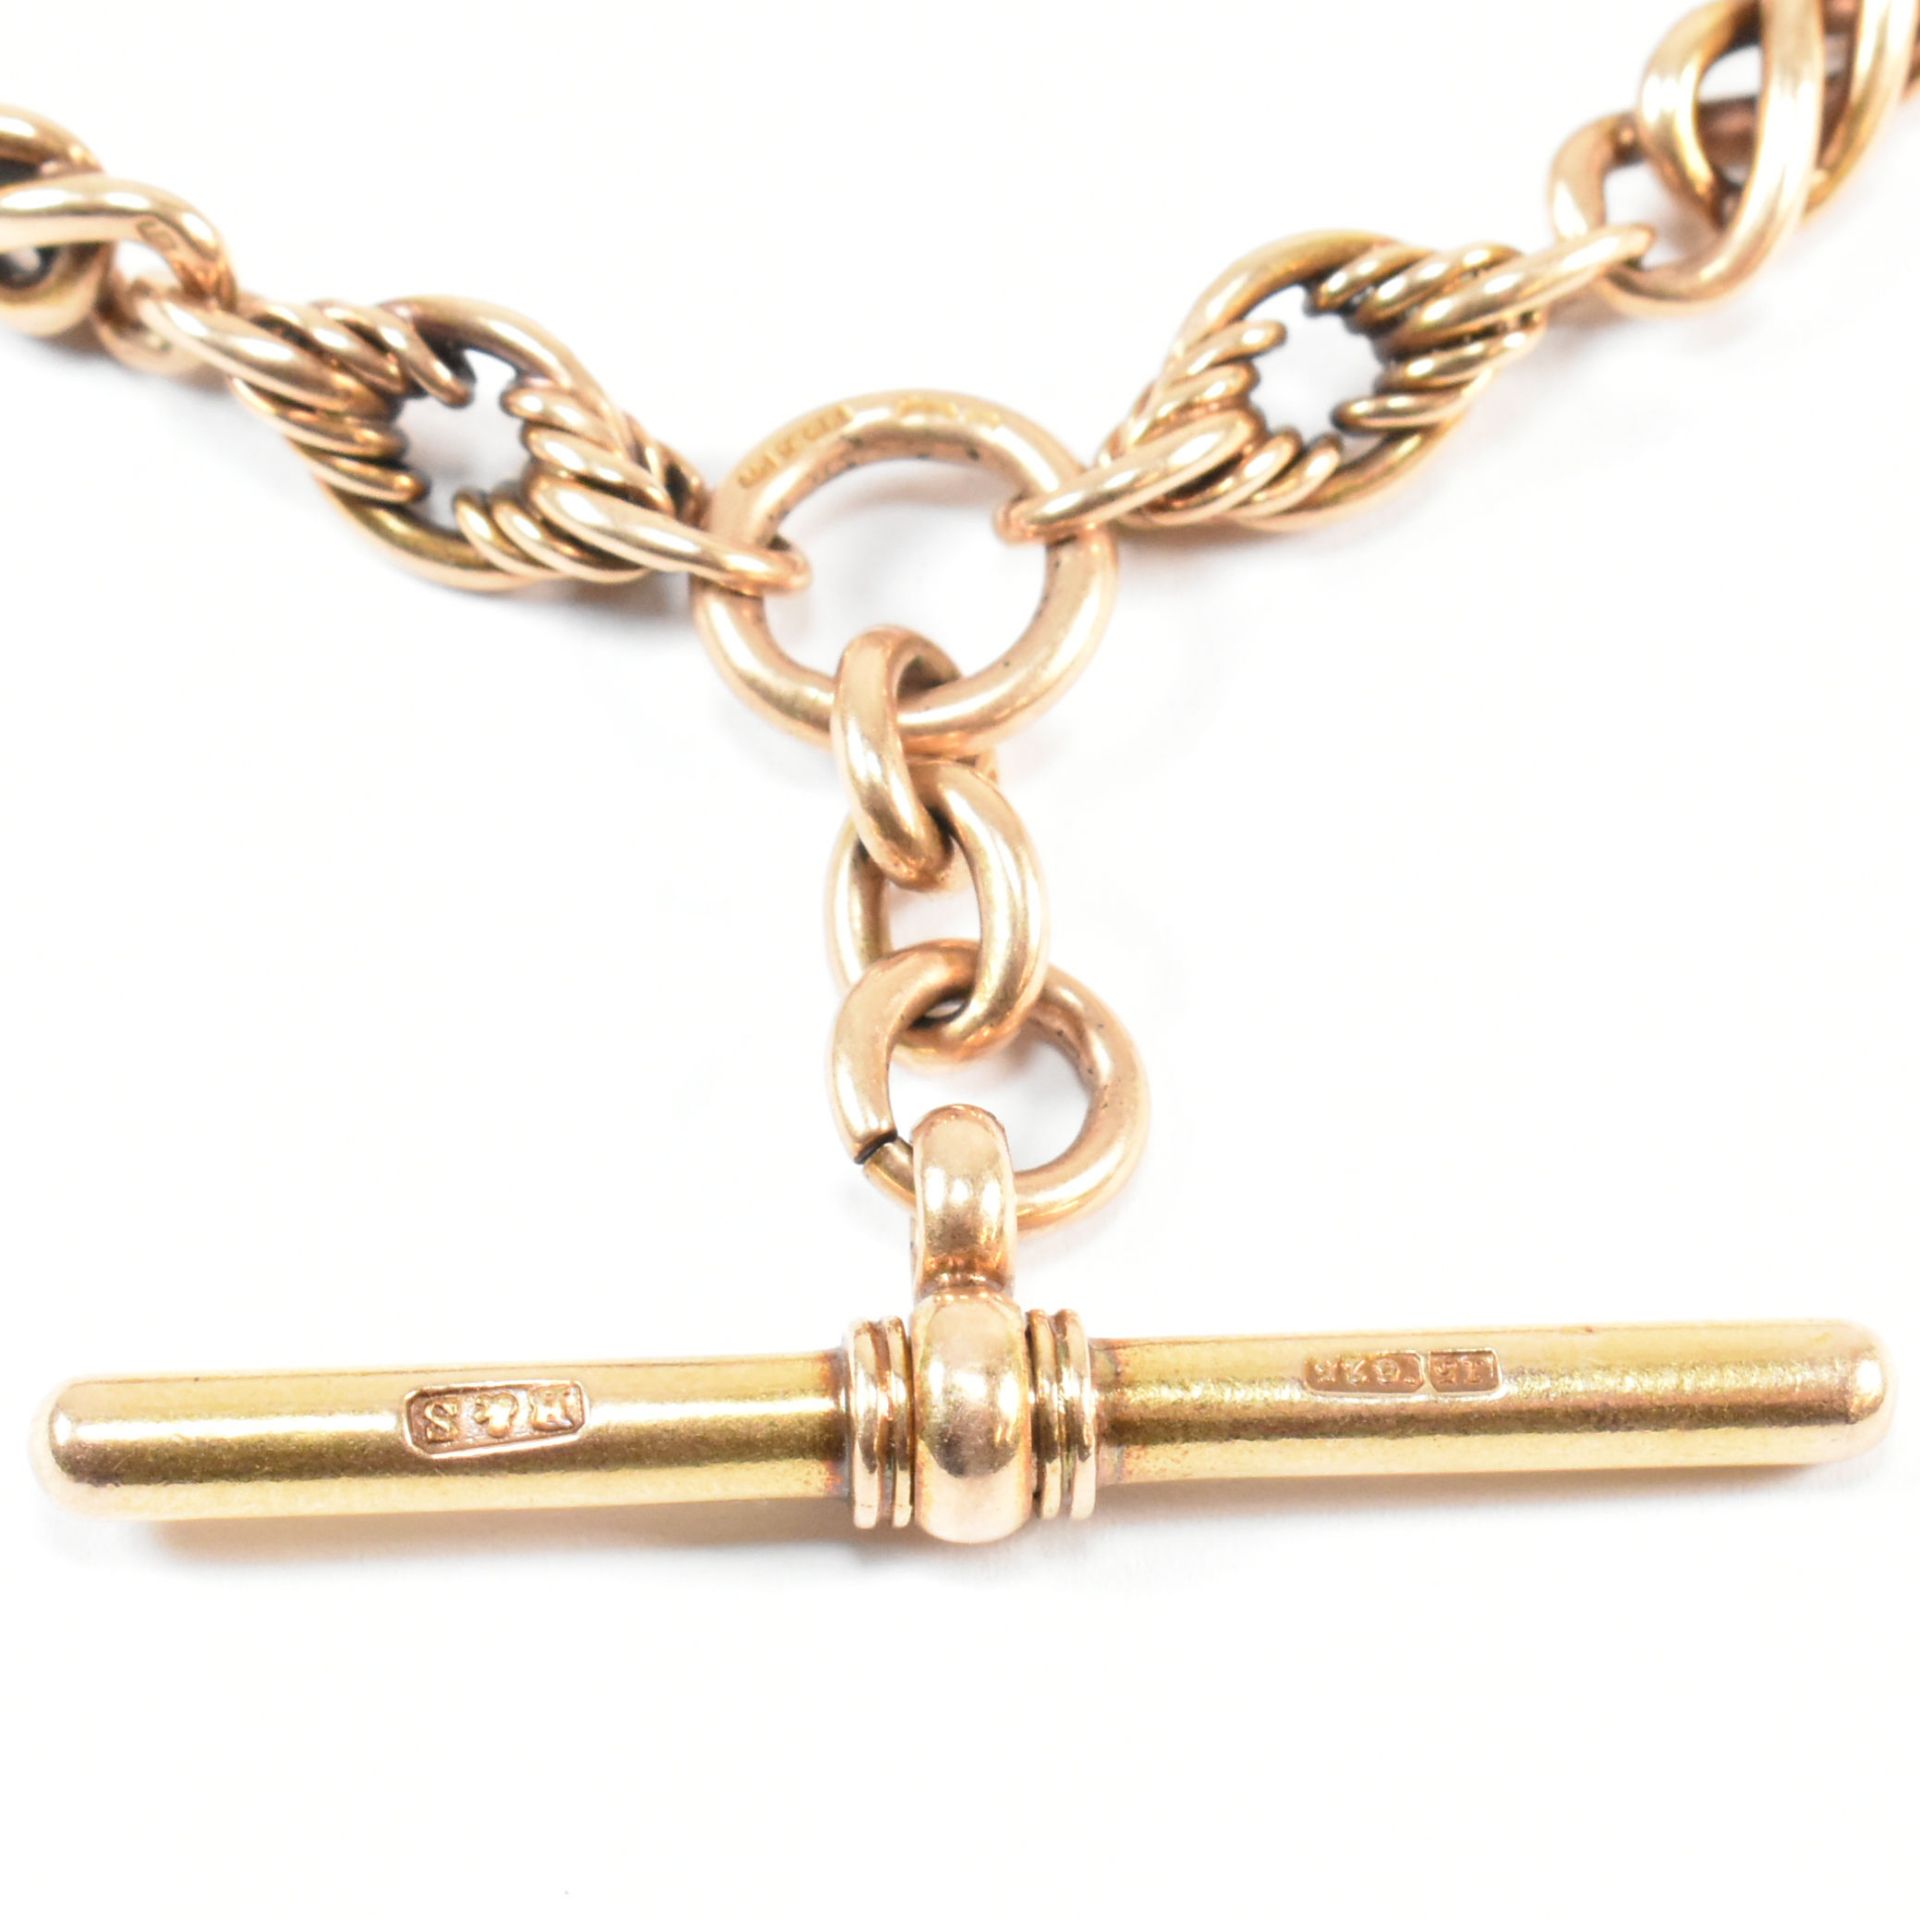 EDWARDIAN HALLMARKED 15CT GOLD ALBERT CHAIN WITH T-BAR - Image 2 of 5